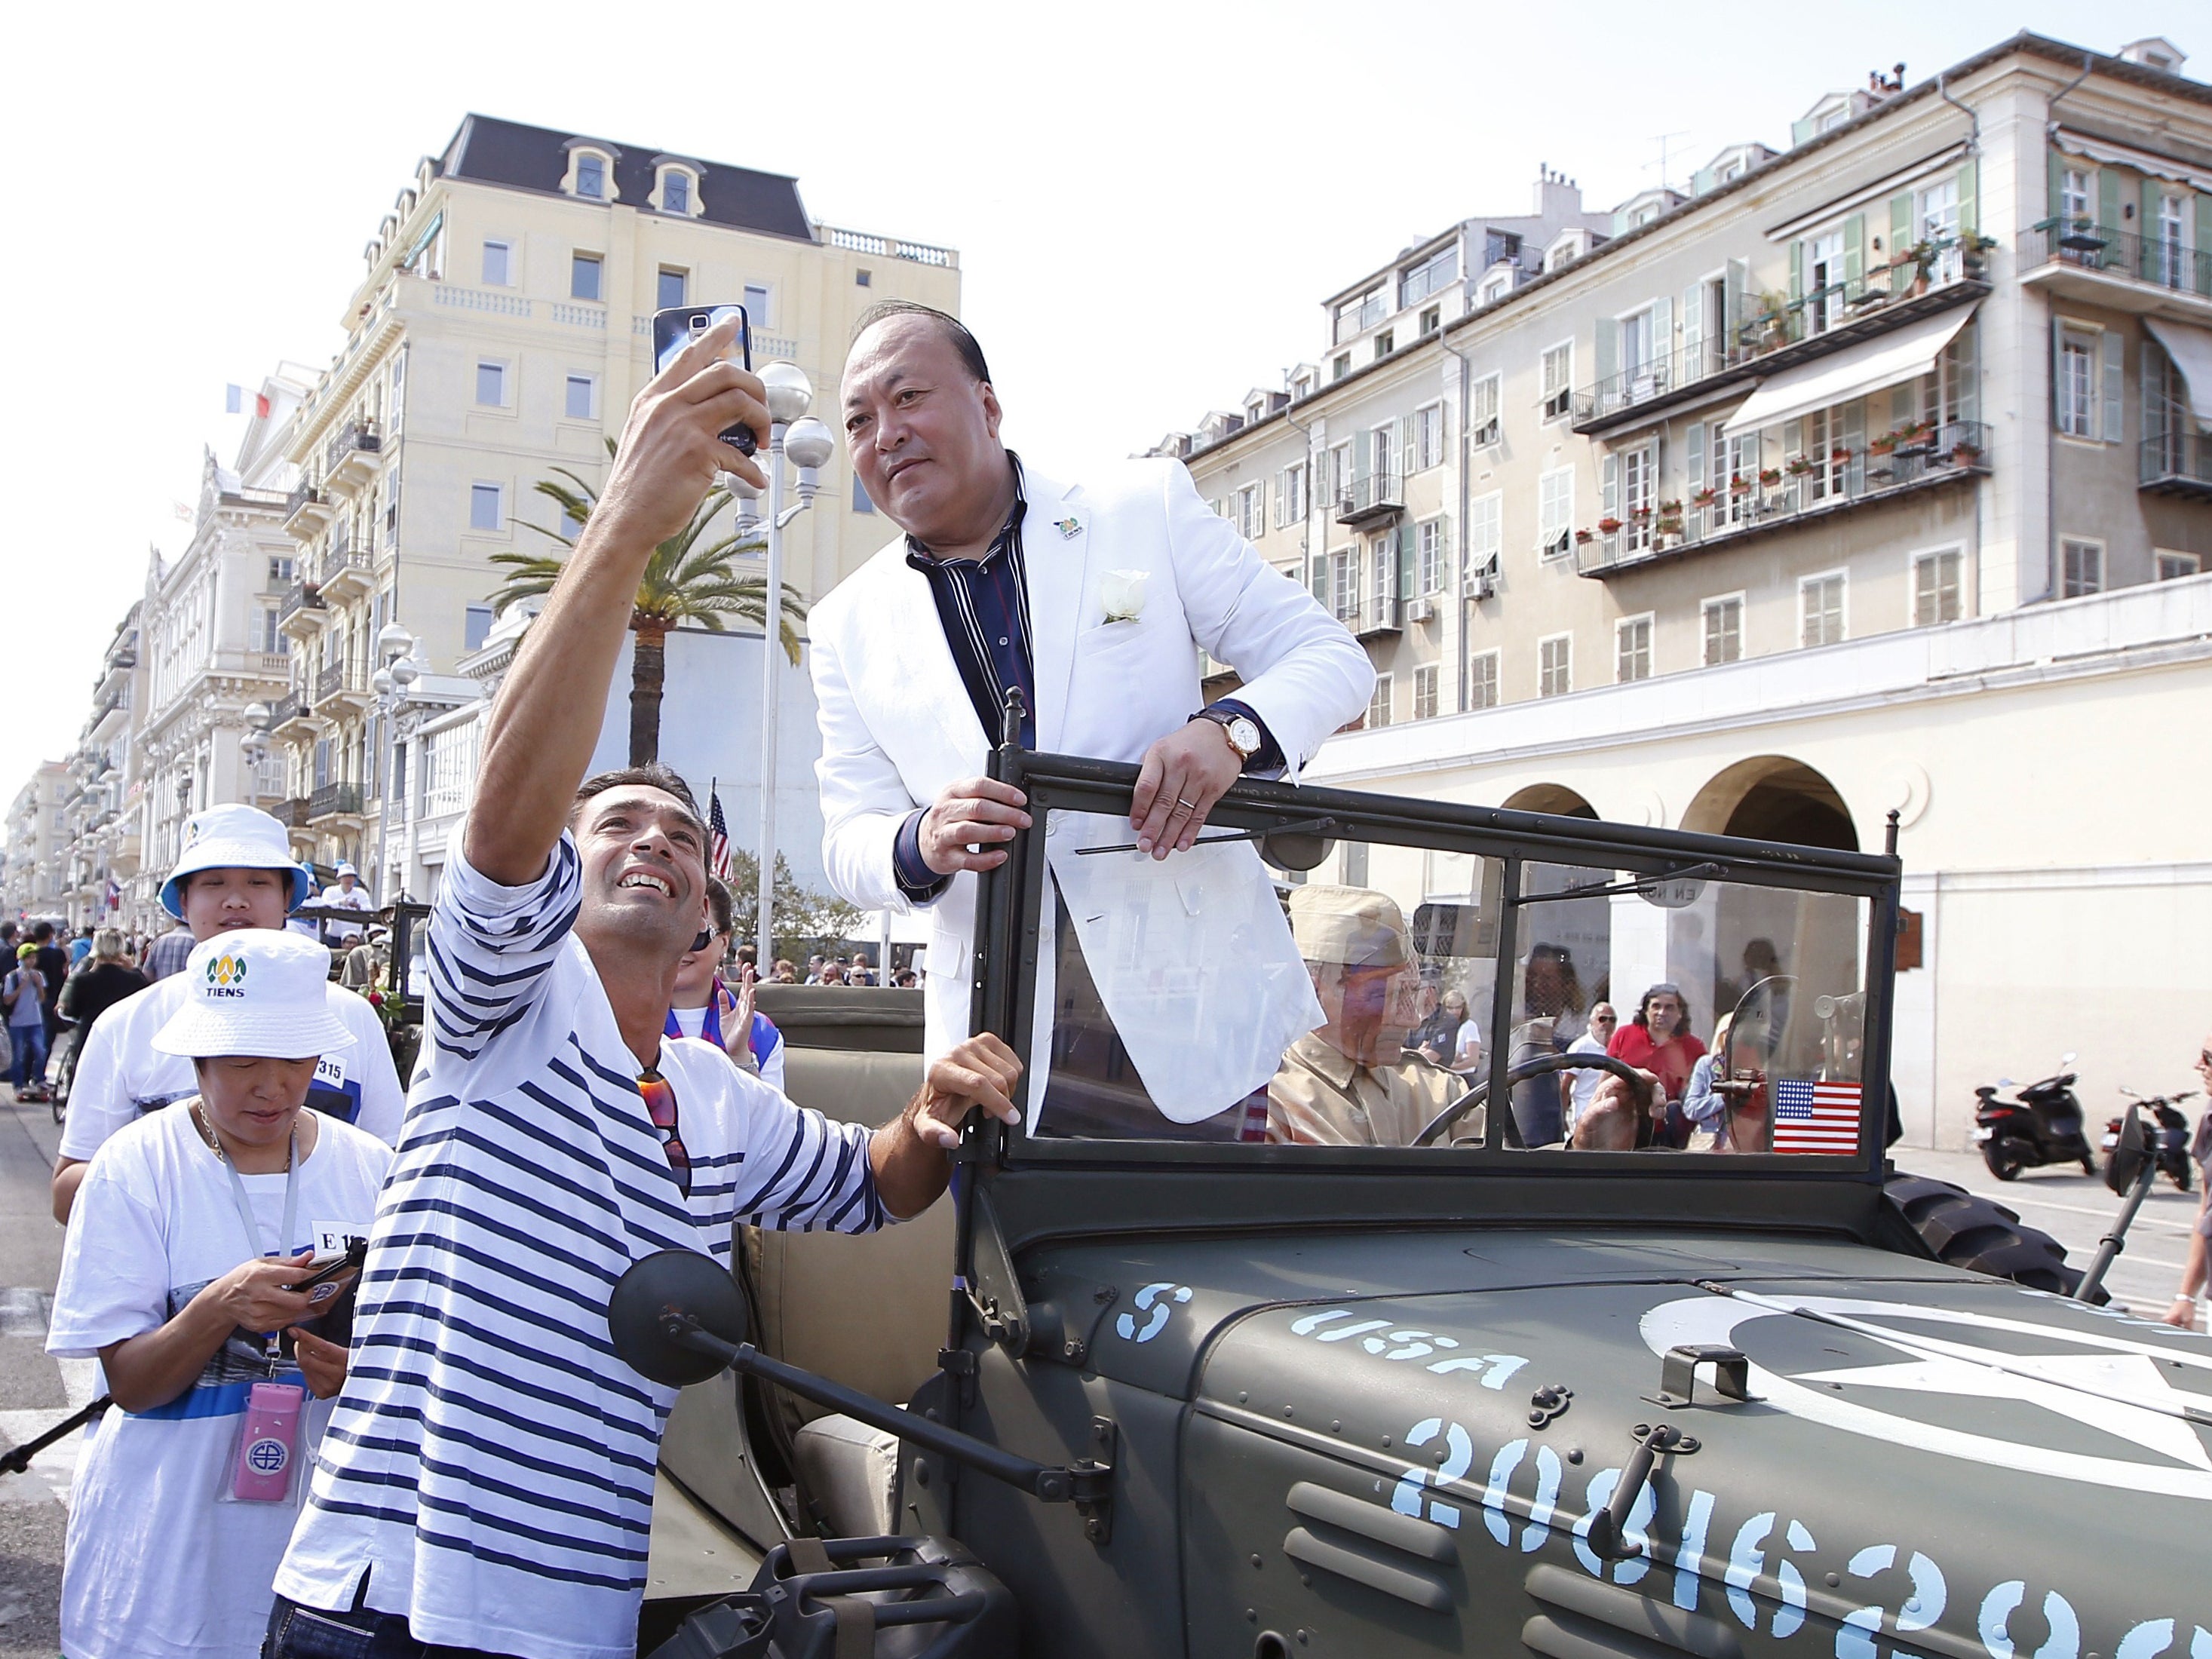 The billionaire took his employees to Paris and the Cote d'Azur